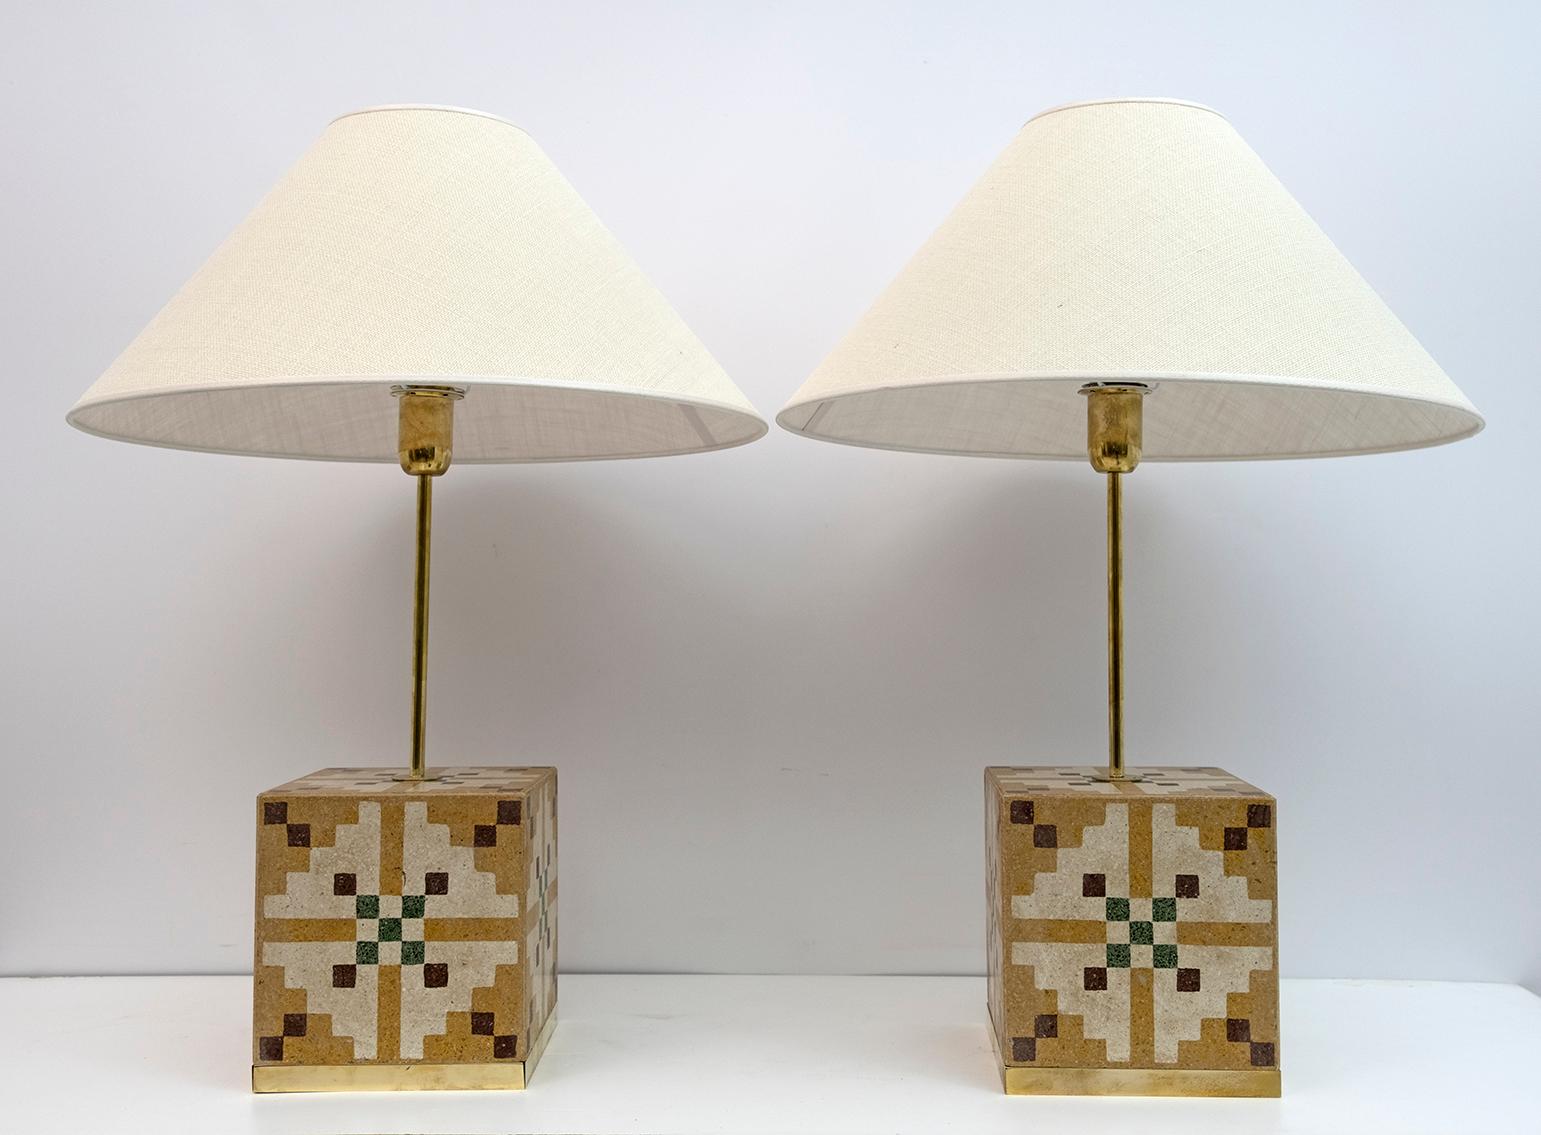 Pair of Italian Art Nouveau Vintage cementite table lamps.
The lamps were made in Italy in the 1920s using cement tiles with geometric decorations typical of Art Nouveau, the frames on the base are made of brass, including the lampshade